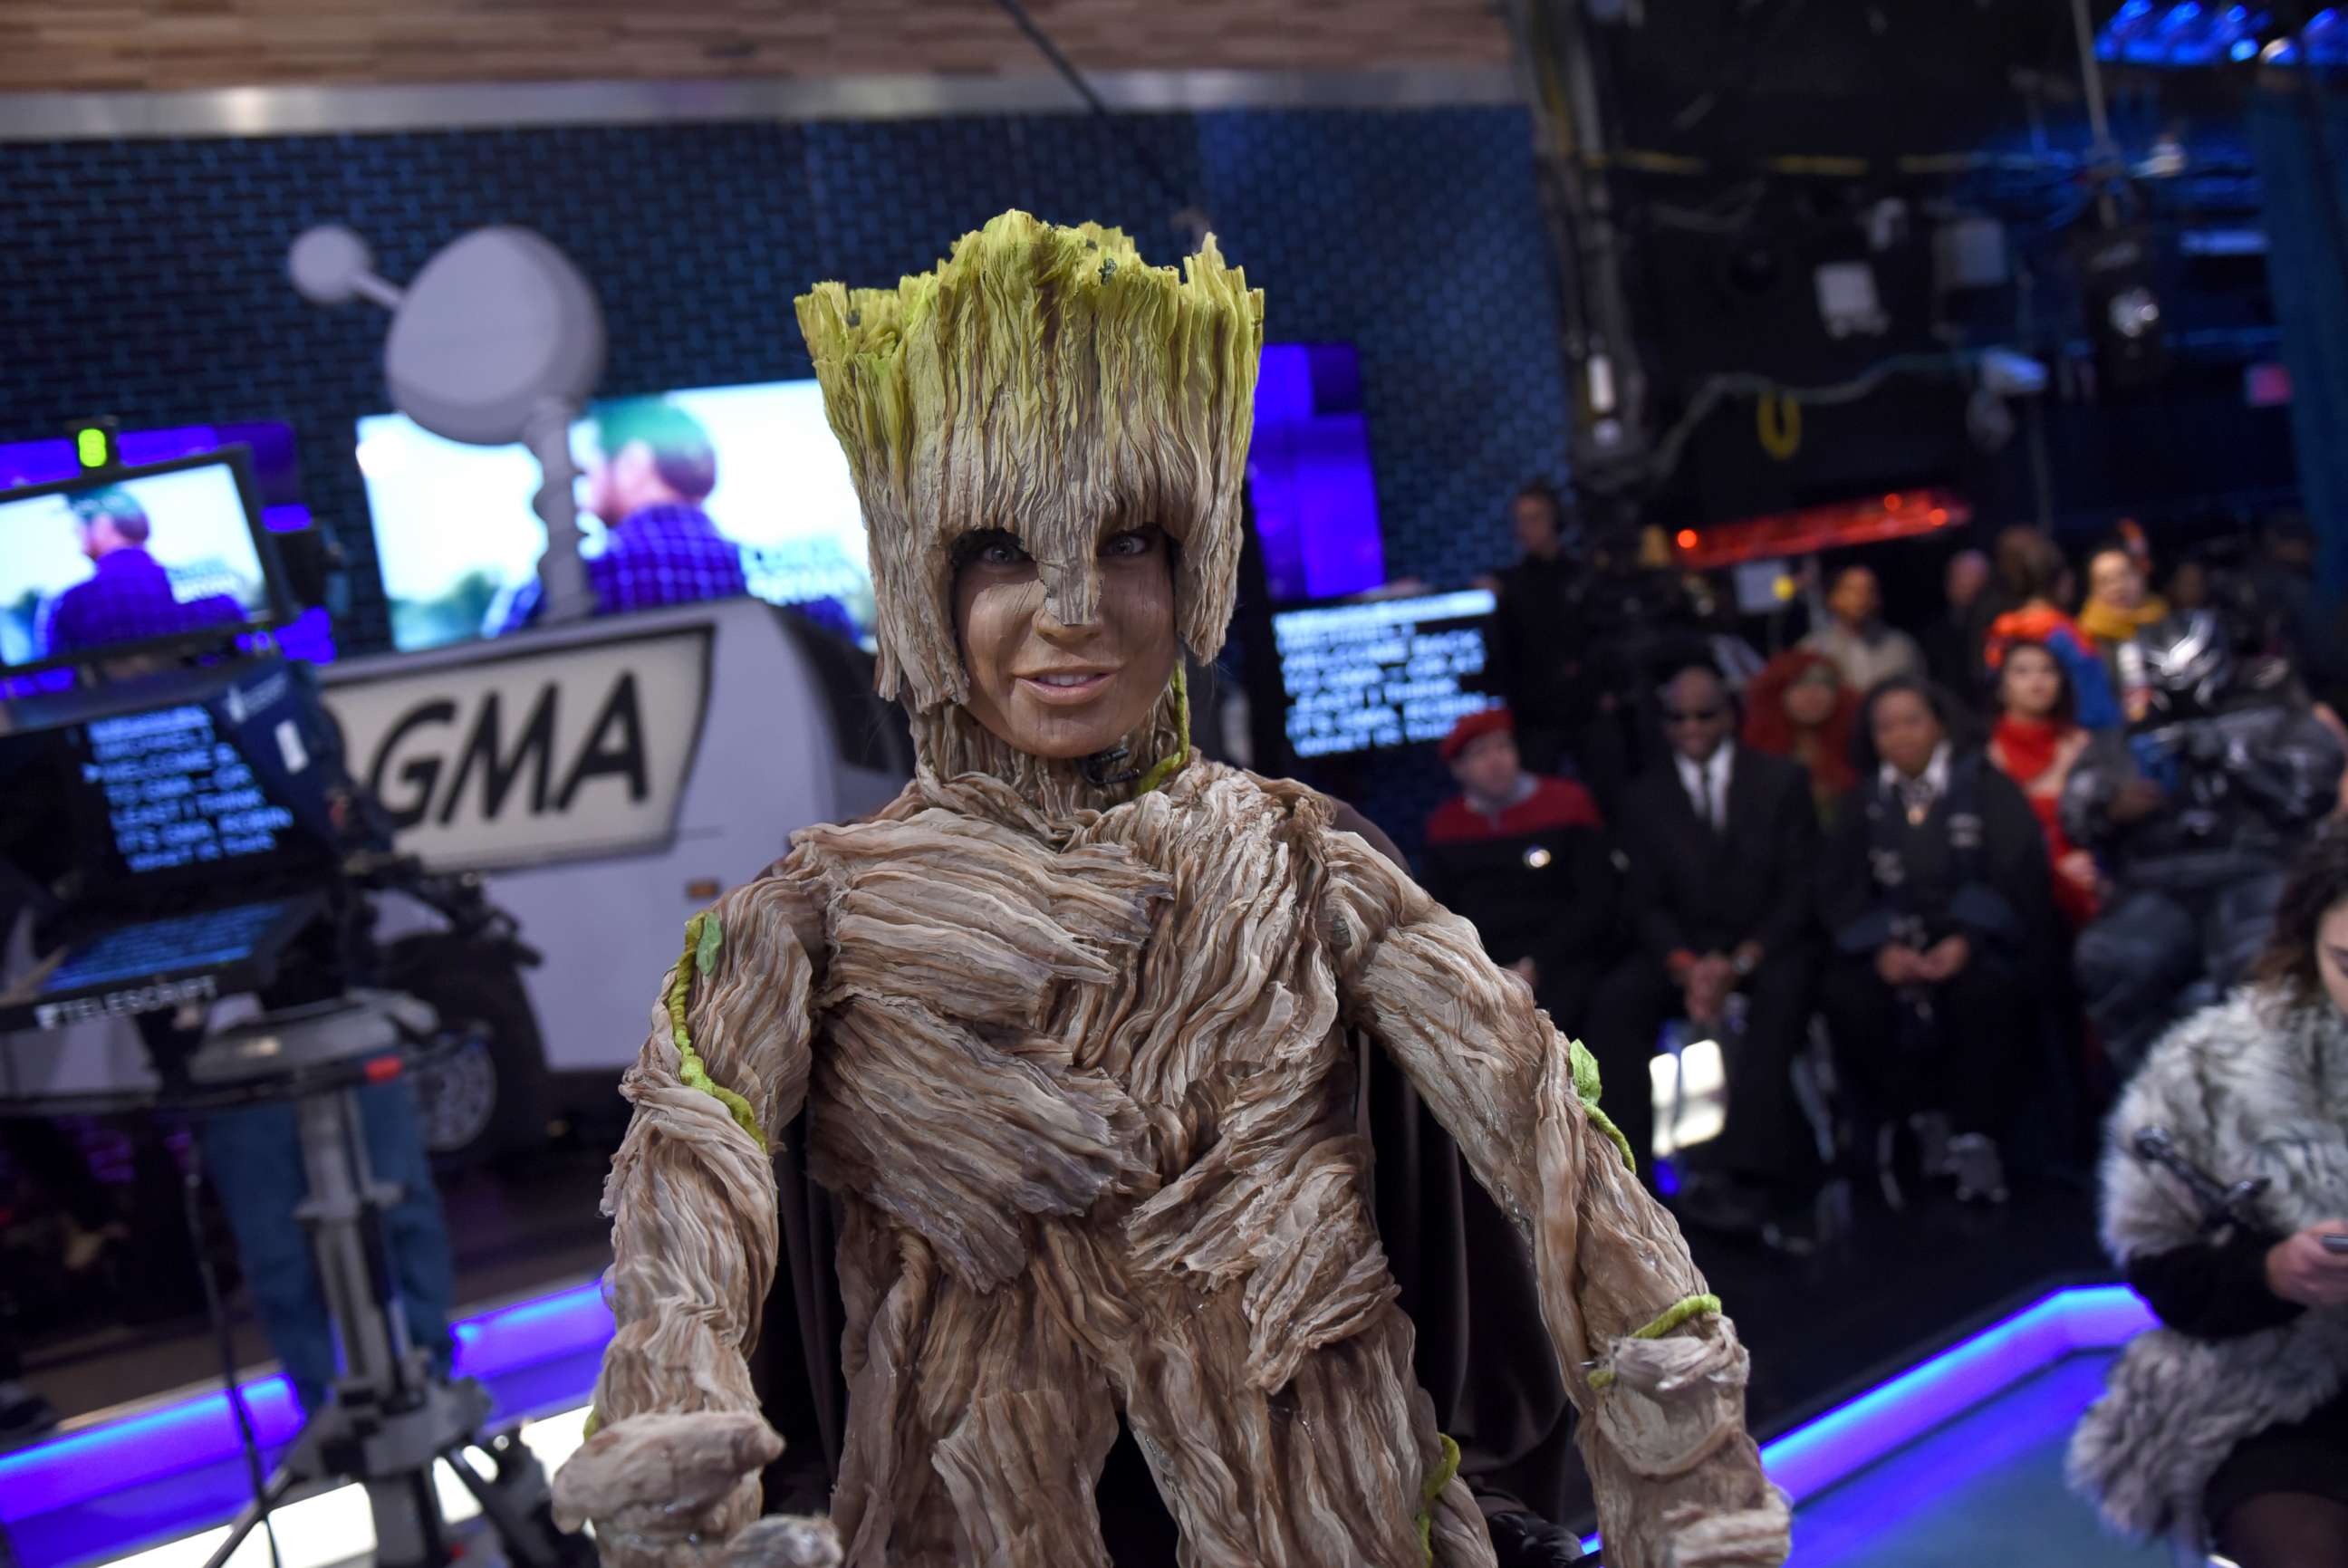 PHOTO: "Good Morning America" chief meteorologist Ginger Zee dressed as baby Groot from "Guardians of the Galaxy Vol. 2" for Halloween.